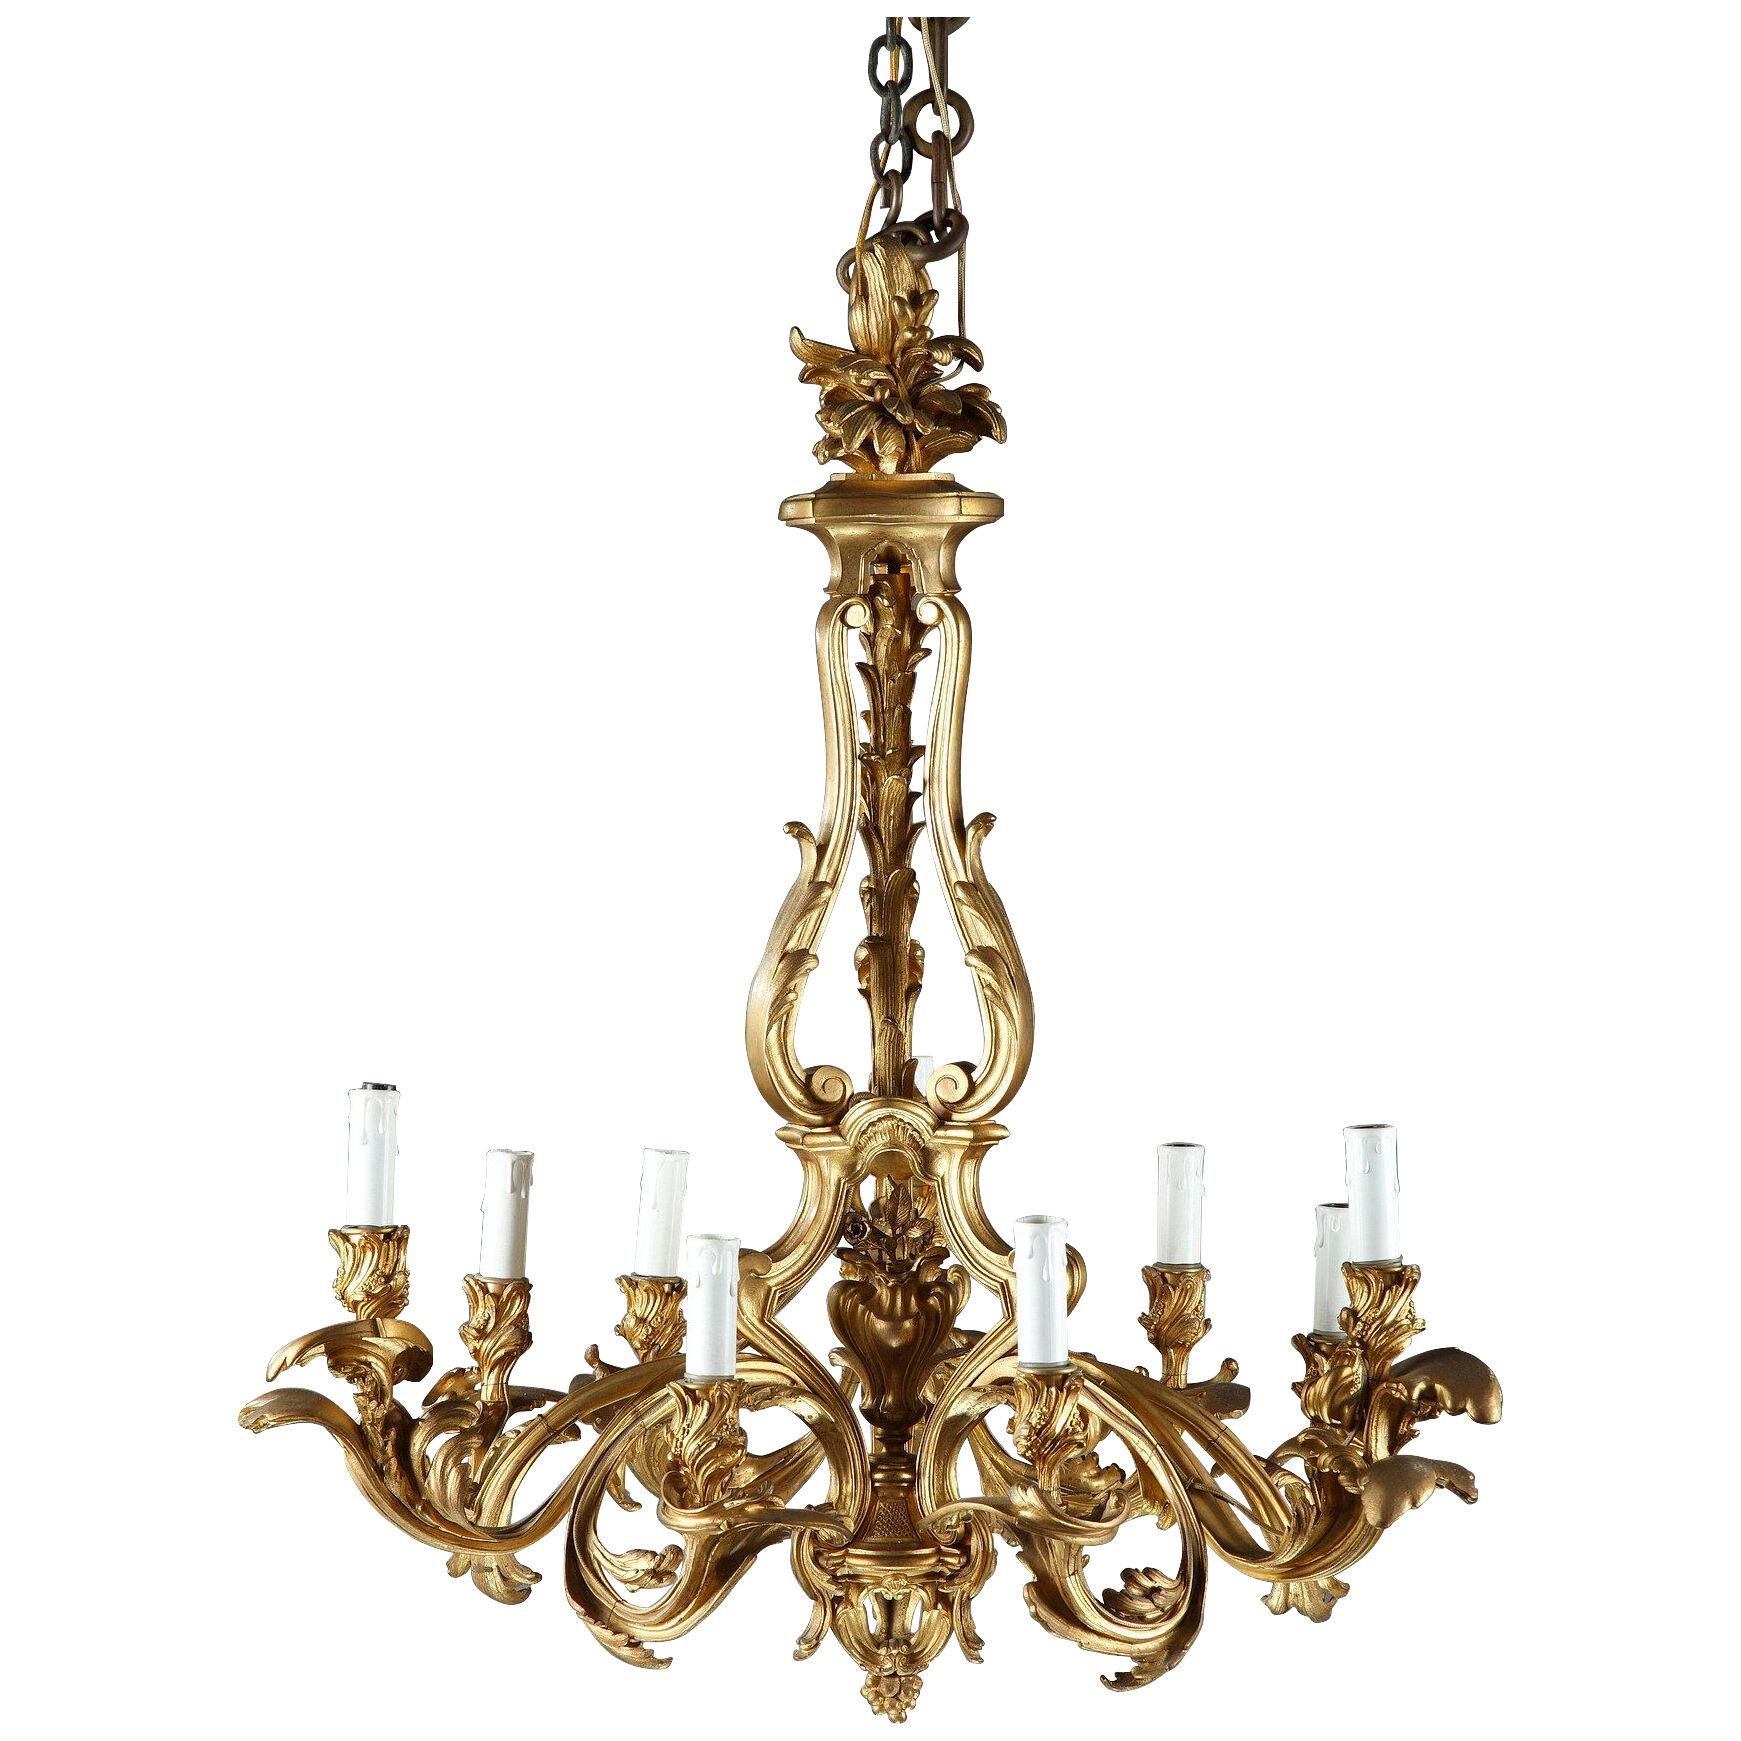 Gilded Bronze Eight Lights Chandelier After a Model by Caffieri, France, c. 1880